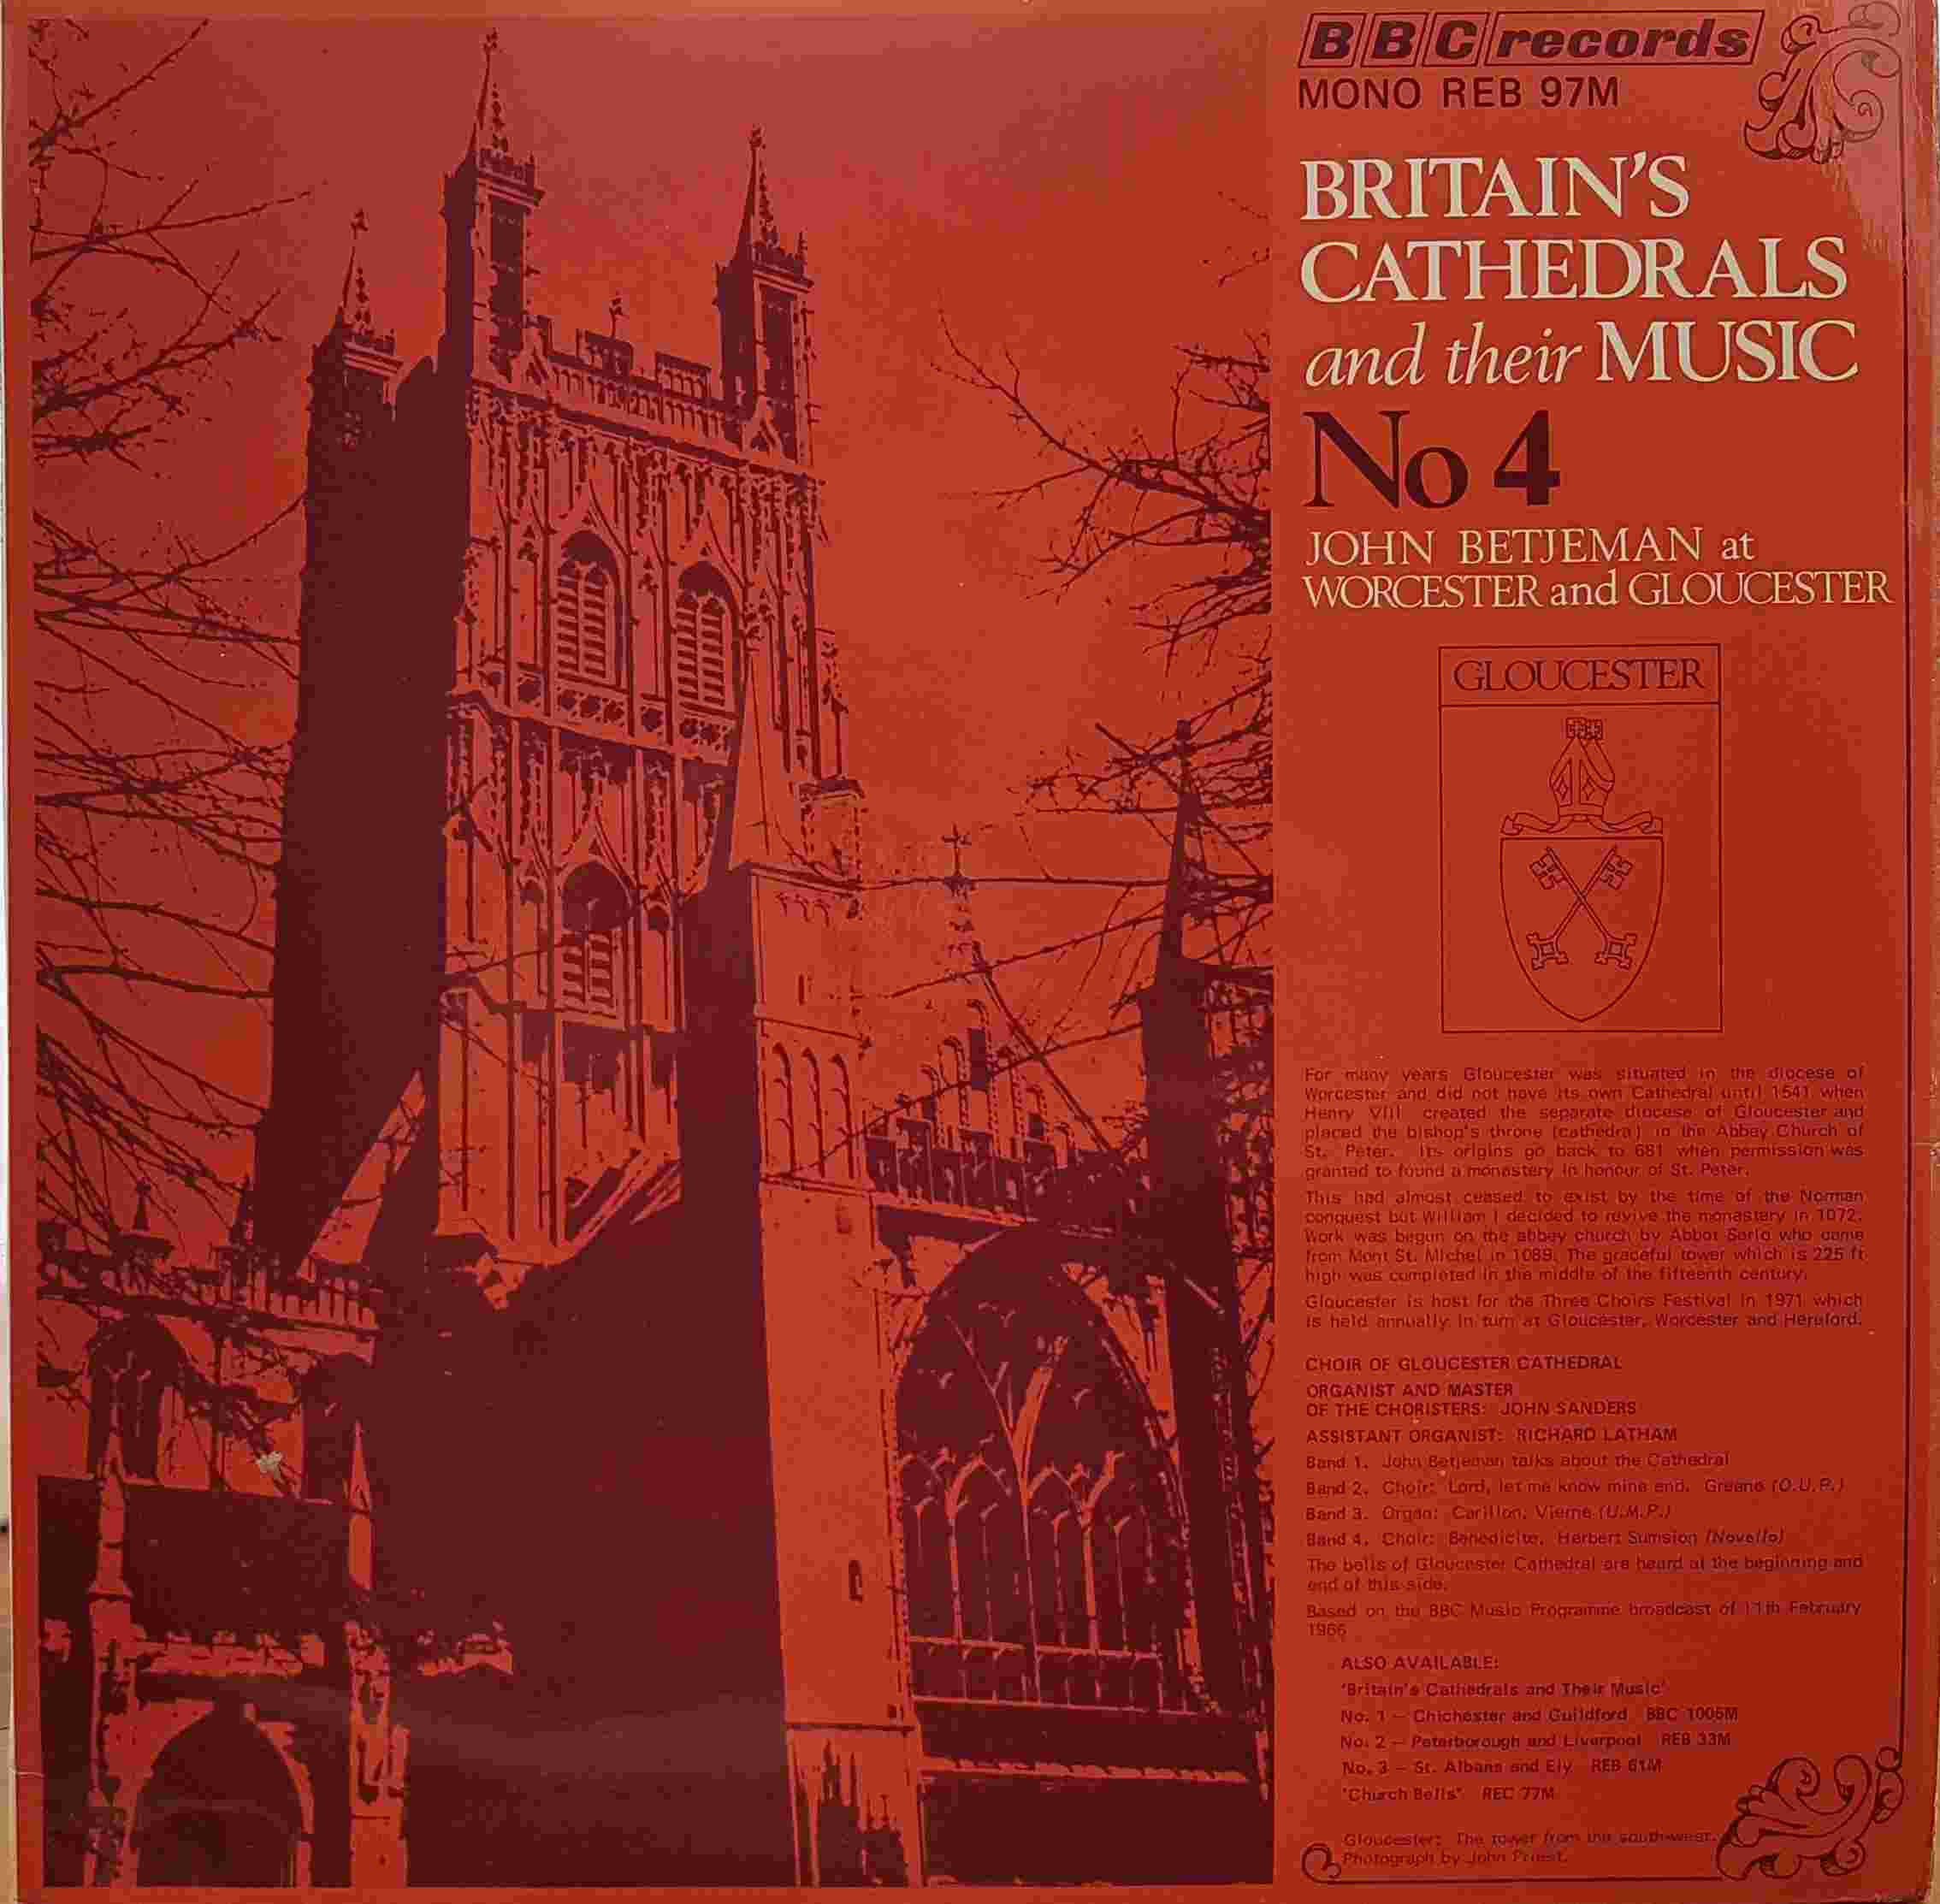 Picture of REB 97 Britain's cathedrals and their music no. 4 - Worcester / Gloucester by artist John Betjeman from the BBC albums - Records and Tapes library